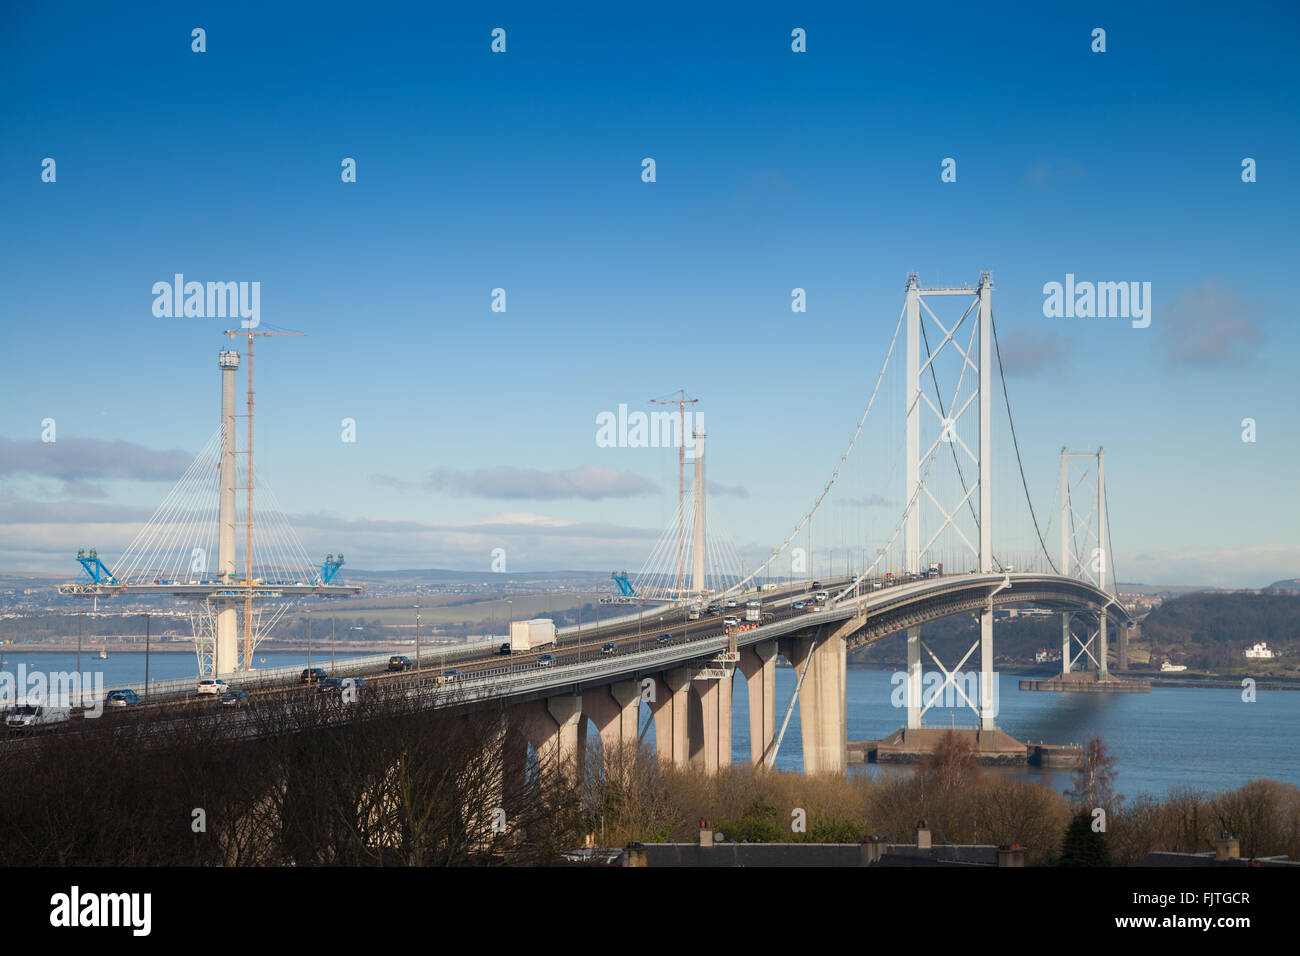 Looking North towards the Forth Road Bridge with the new Queensferry Crossing in the background, South Queensferry, Edinburgh. Stock Photo